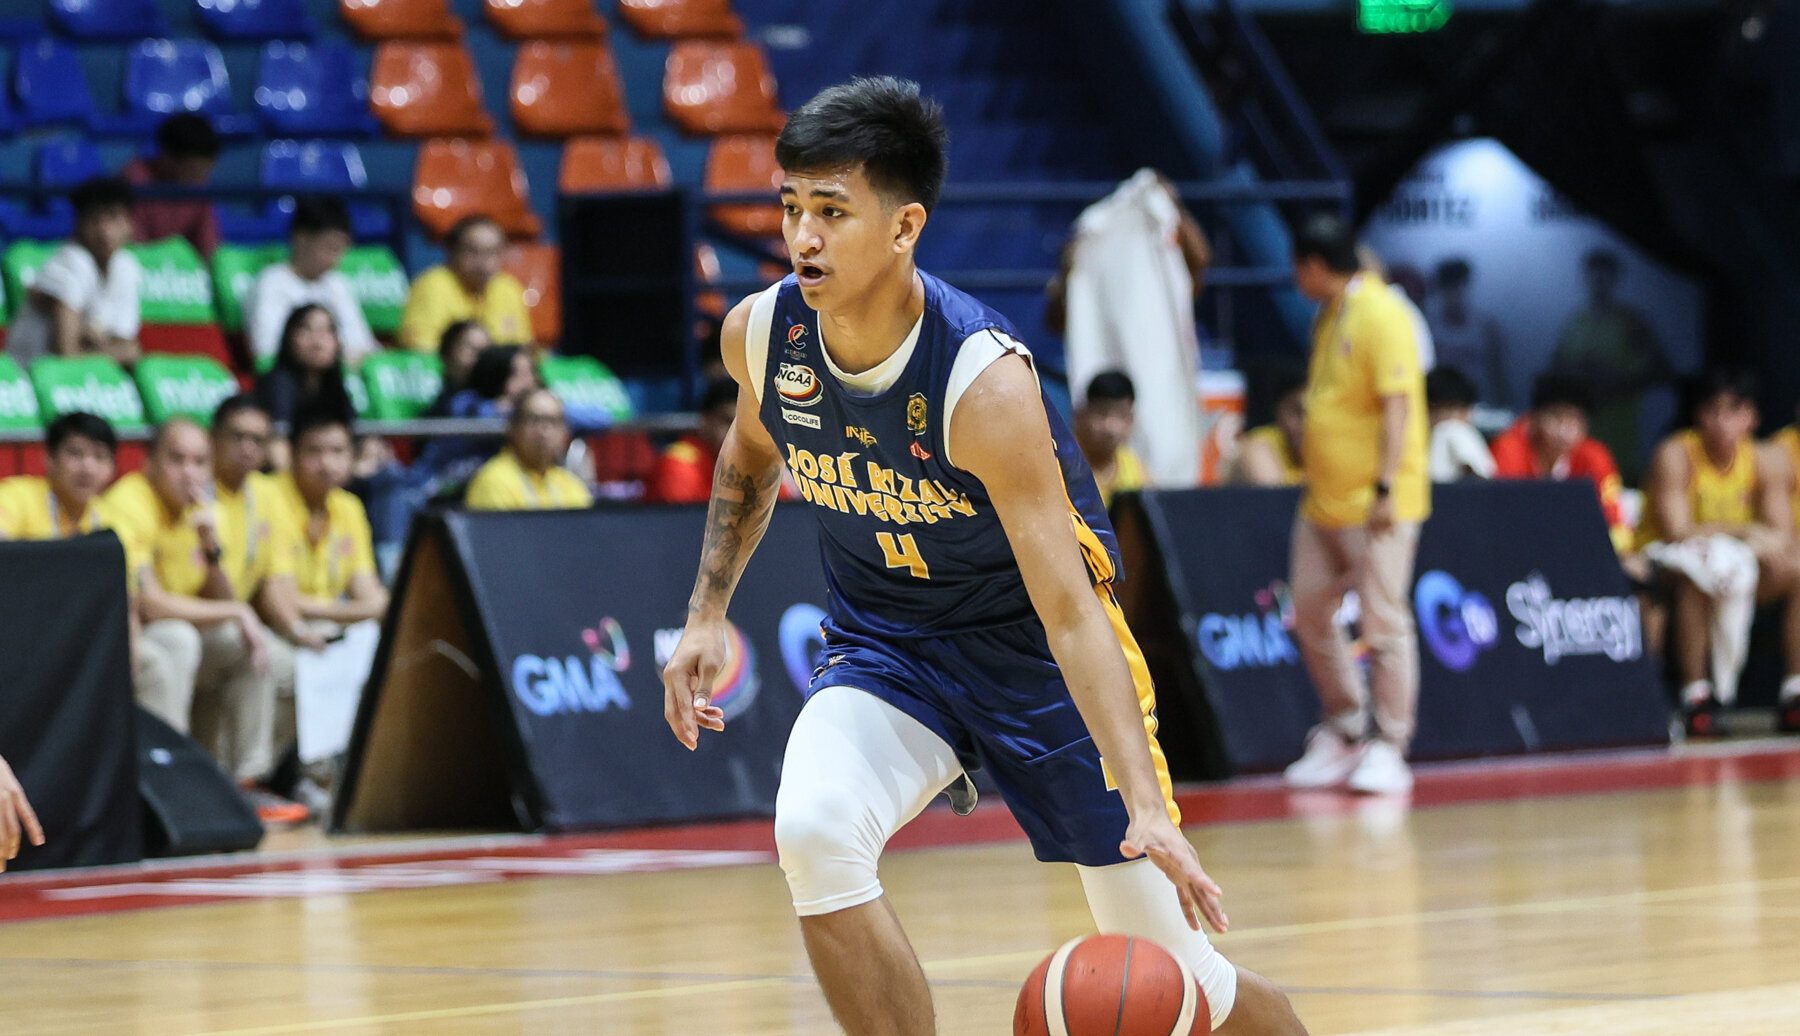 JRU, EAC fuel Final Four hopes with rout of Letran, Arellano  